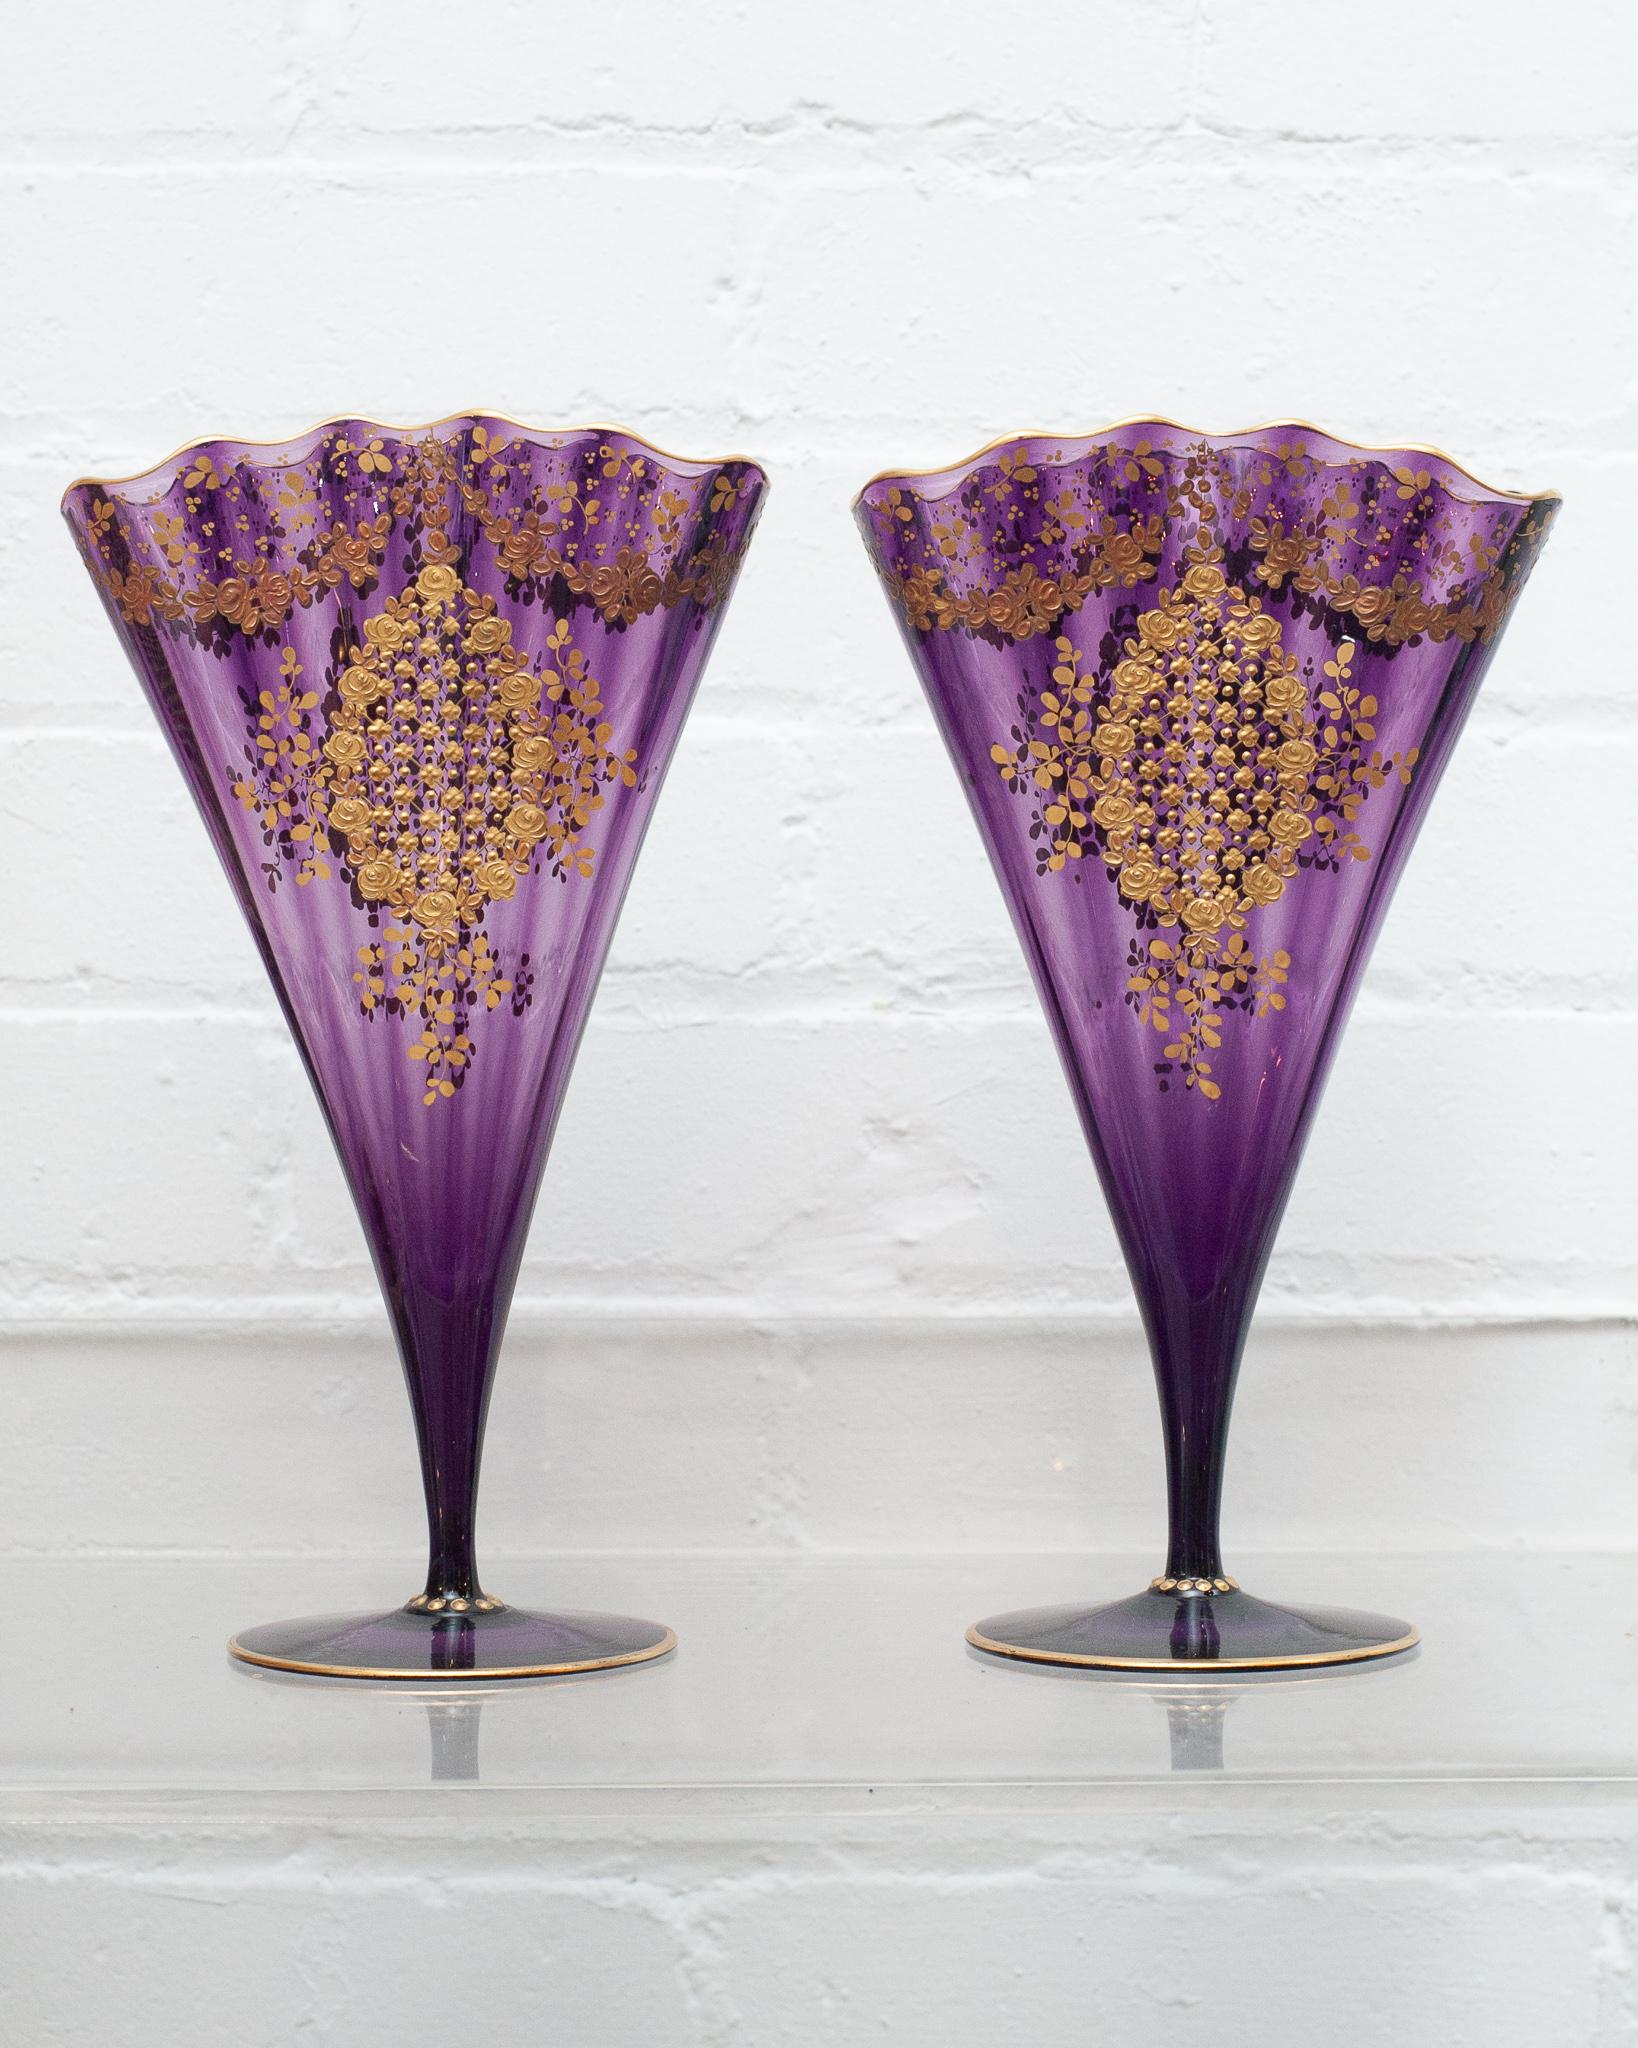 A spectacular pair of antique Moser purple amethyst fan vases with ornate gold gilding. Produced in the early 20th century, these vases are in perfect condition and showcase fine craftsmanship. Their vibrant amethyst purple tone highlights the